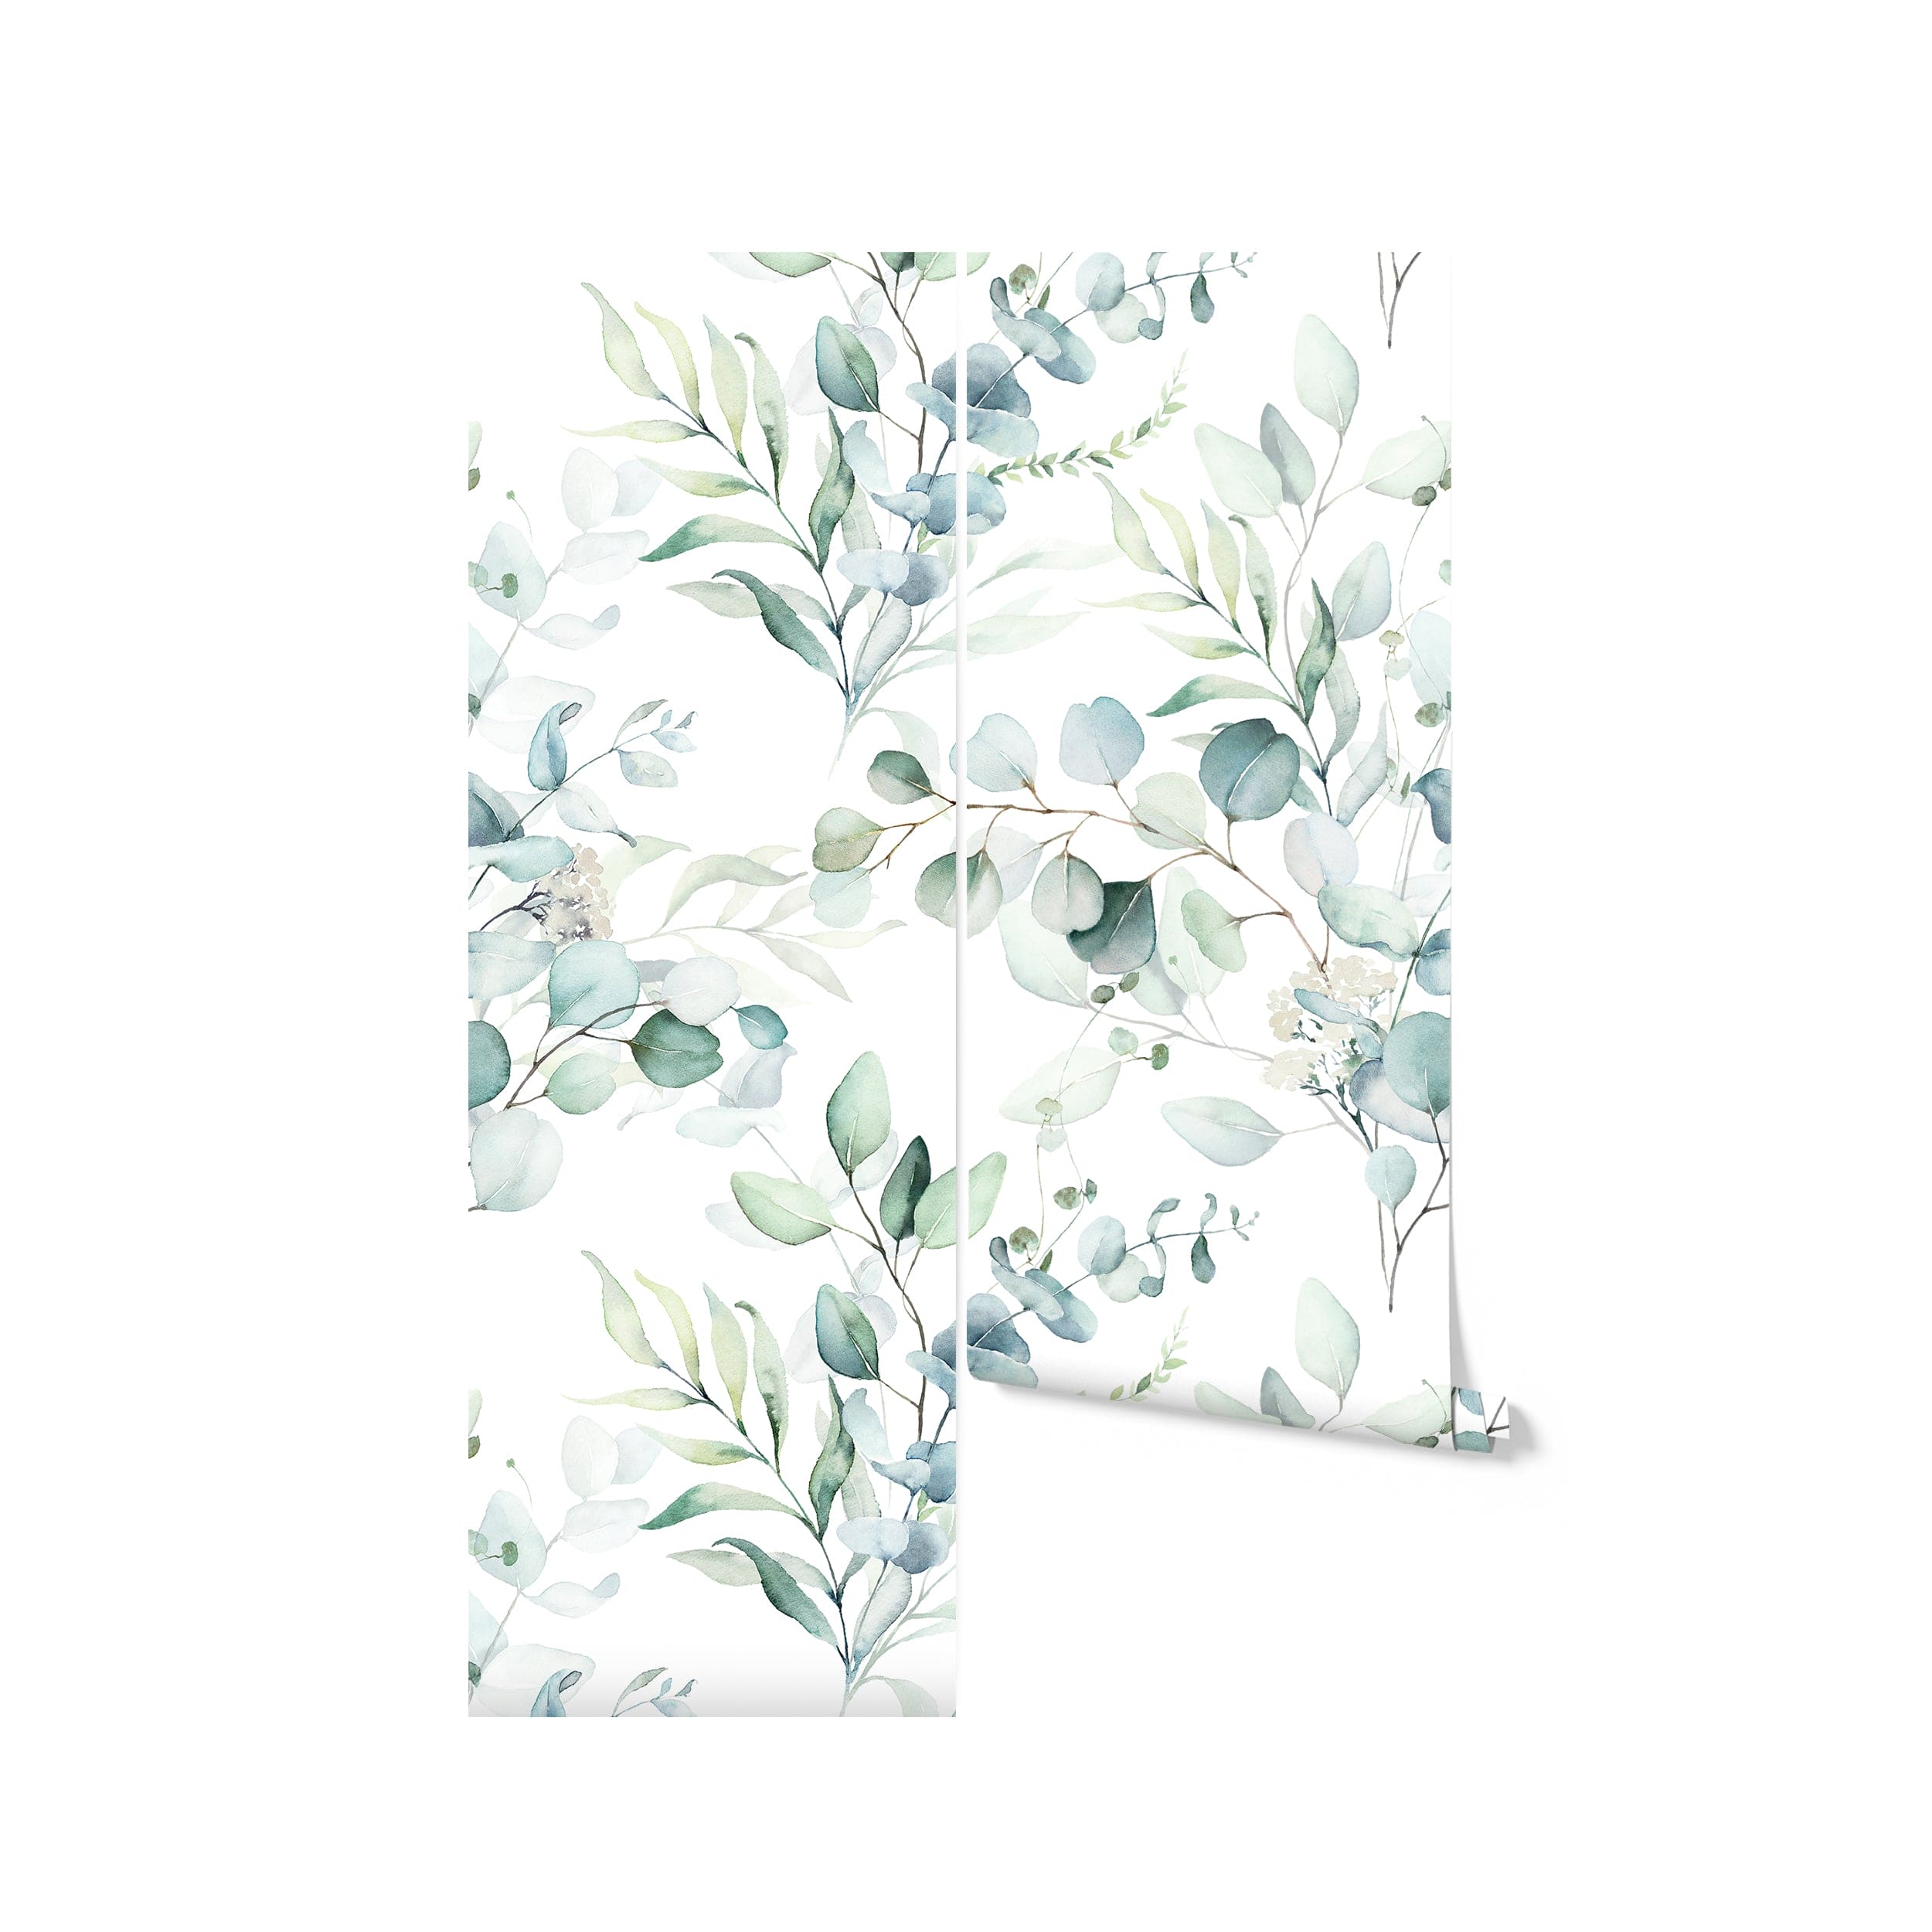 A roll of Green Leaves and Branches Wallpaper - Large unfurling to display the lush, detailed foliage pattern, perfect for adding a bold yet calming nature-inspired statement to walls in a home or office setting.